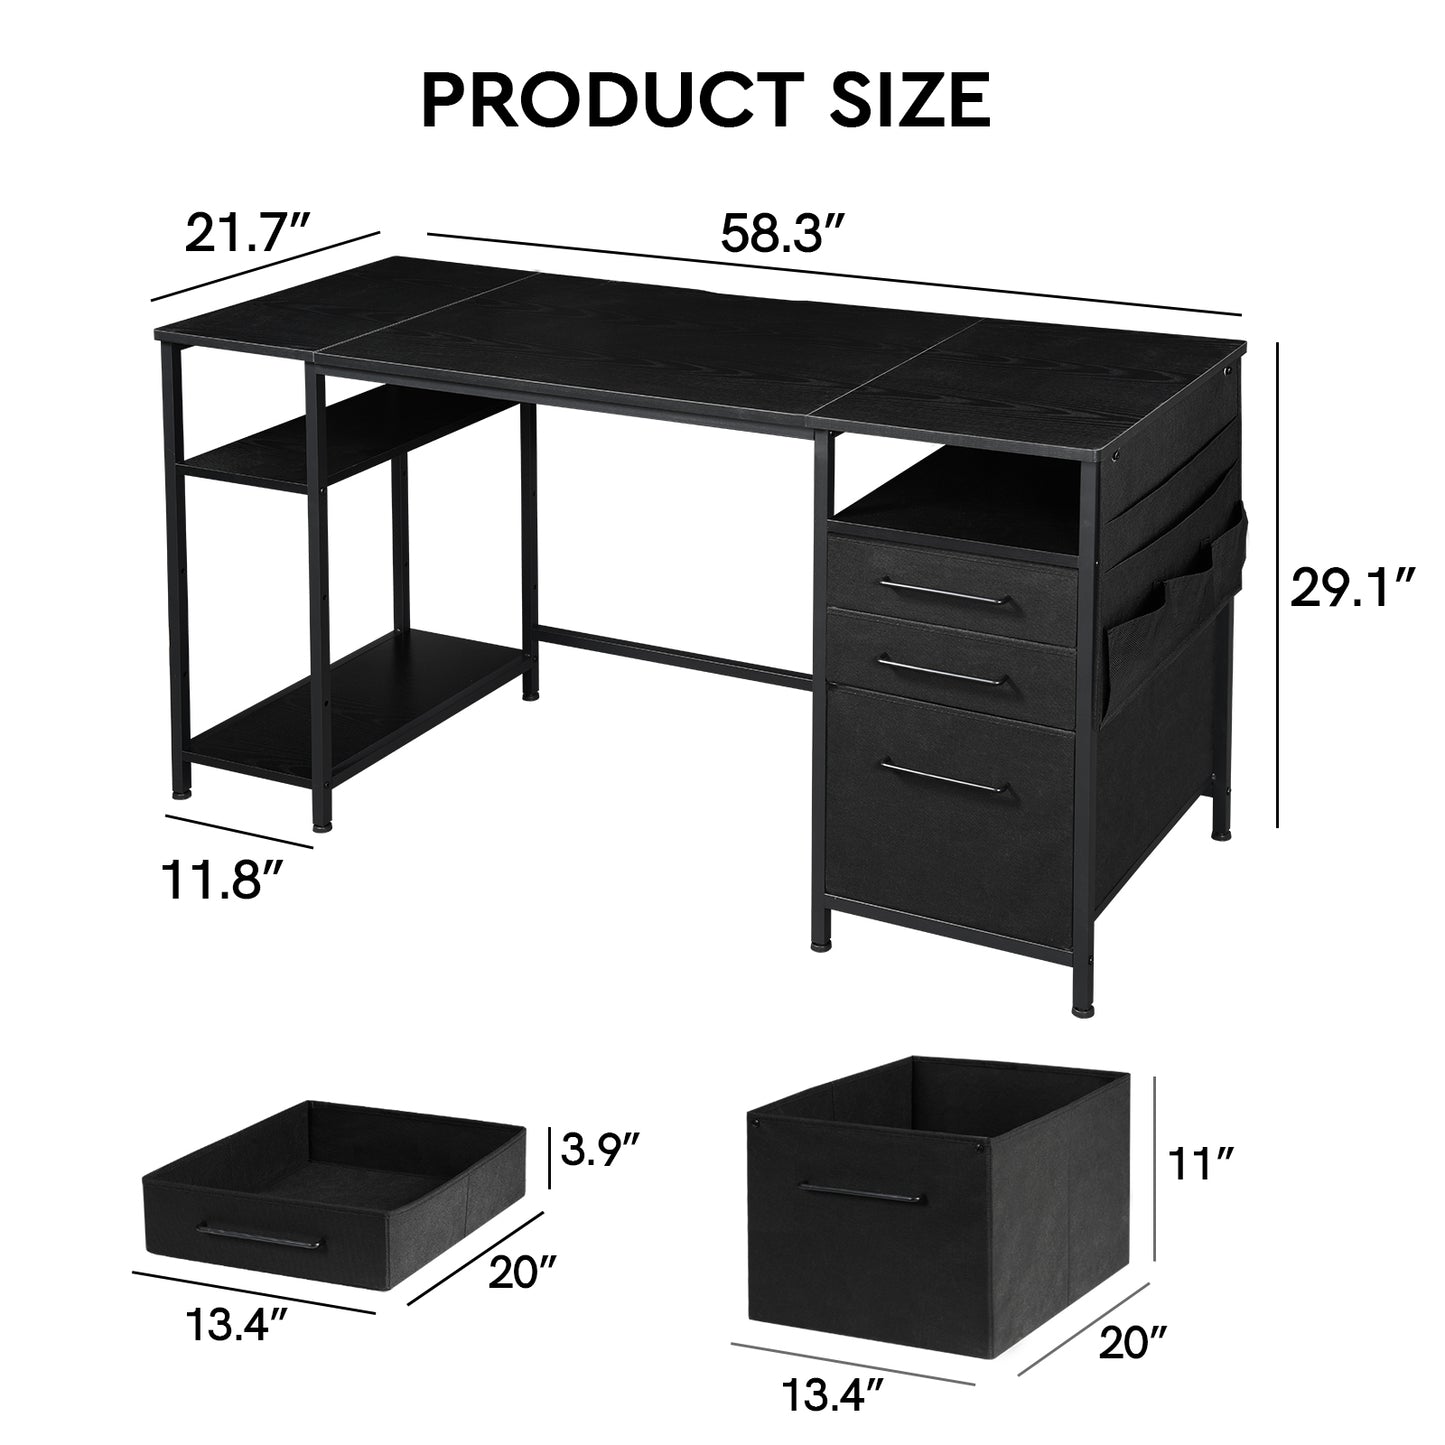 MAIHAIL 59 inch Desk with Drawers, Black